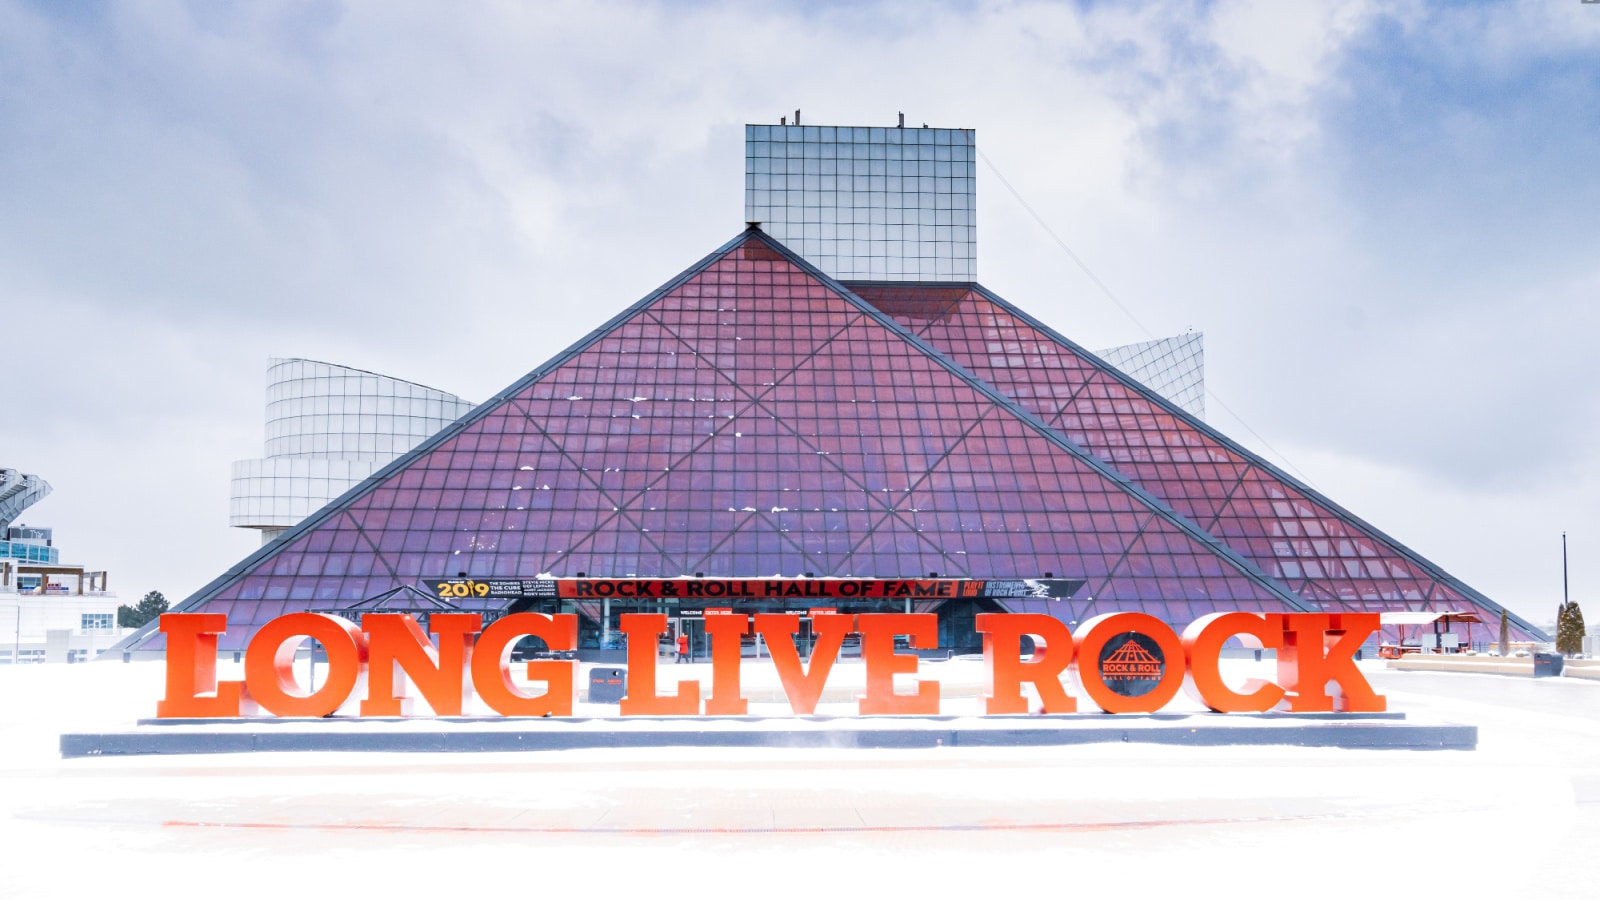 <p>In Cleveland, the Rock and Roll Hall of Fame is a must-visit for music lovers. It celebrates the history of rock music with exhibits and memorabilia.</p>